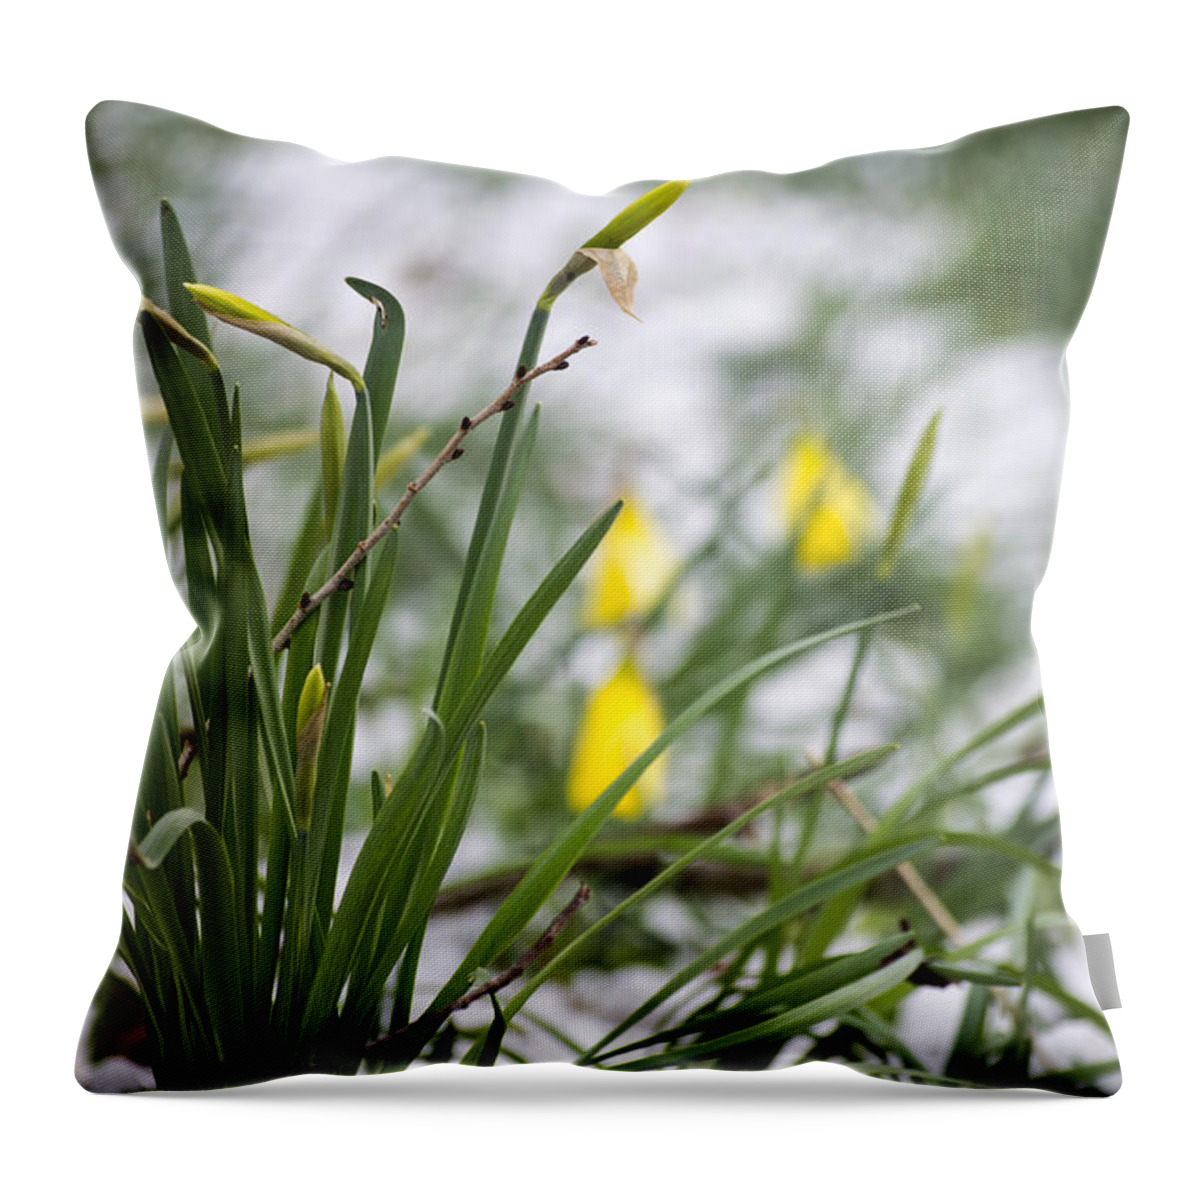 Daffodils Throw Pillow featuring the photograph Snowy Daffodils by Spikey Mouse Photography